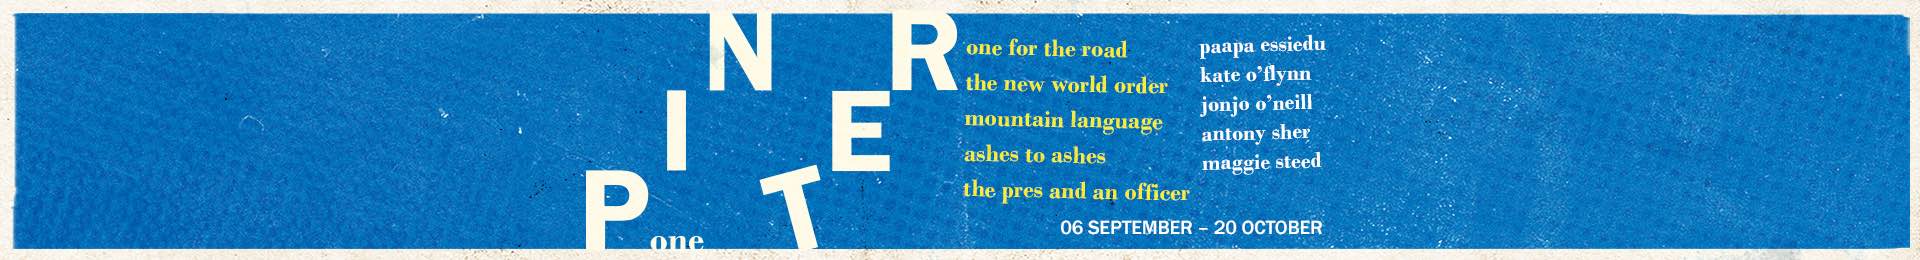 Pinter 1: One For The Road/New World Order/Mountain Language/Ashes to Ashes banner image